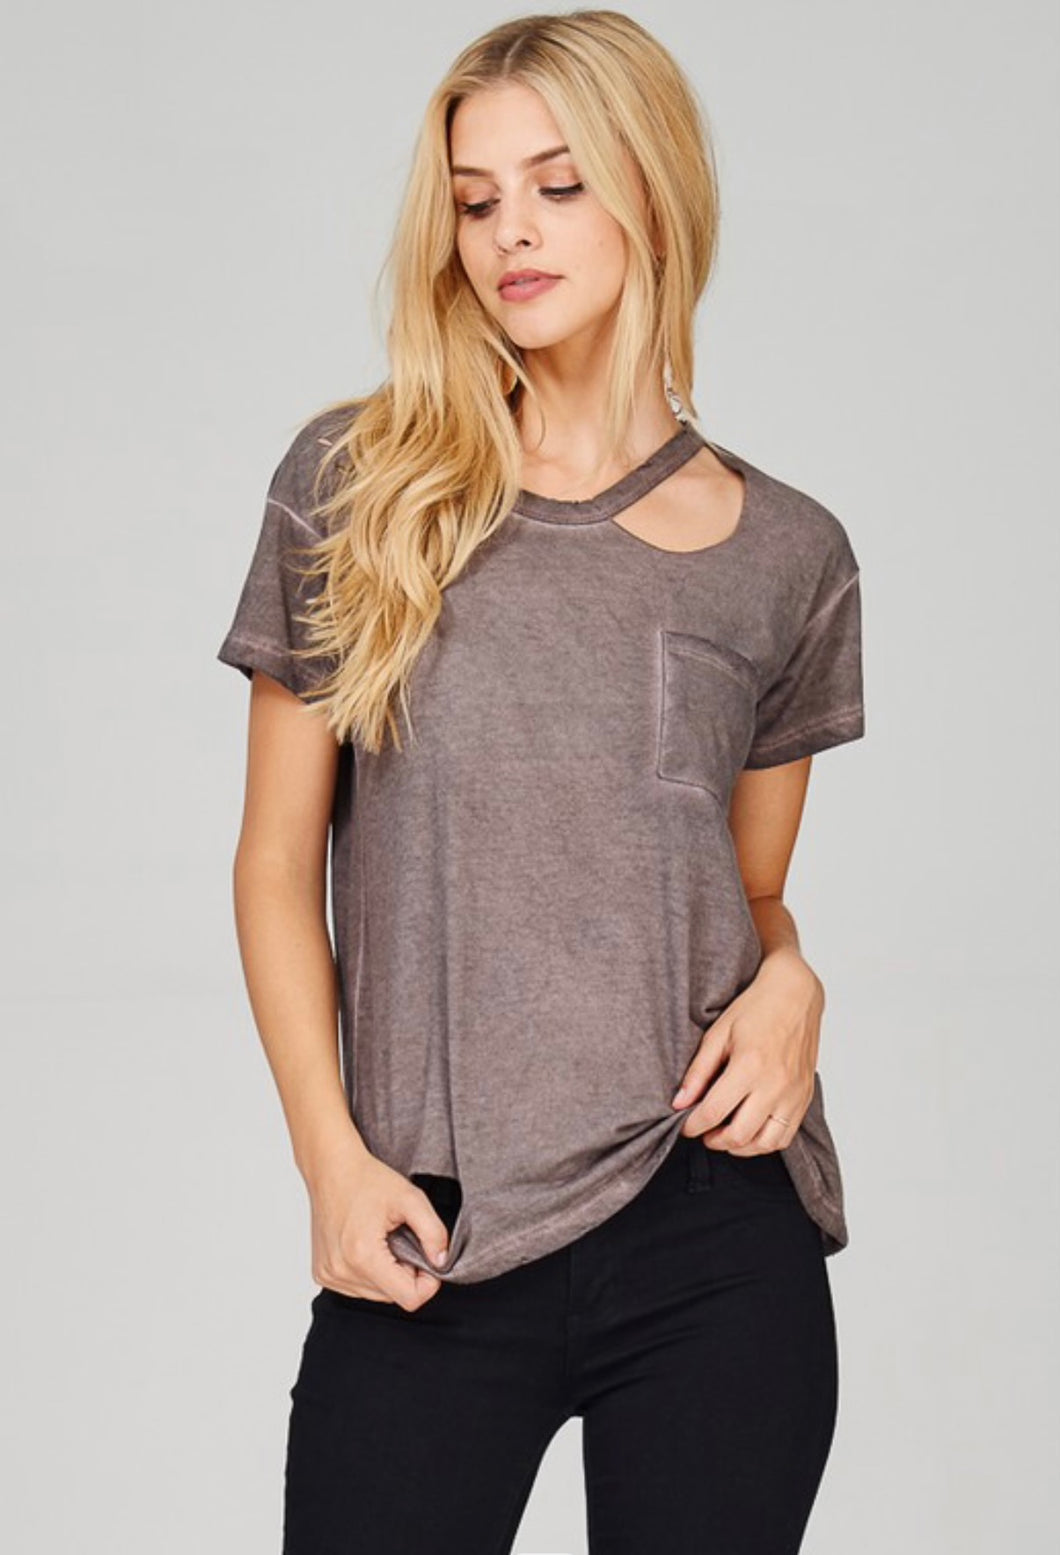 The Distressed Tee